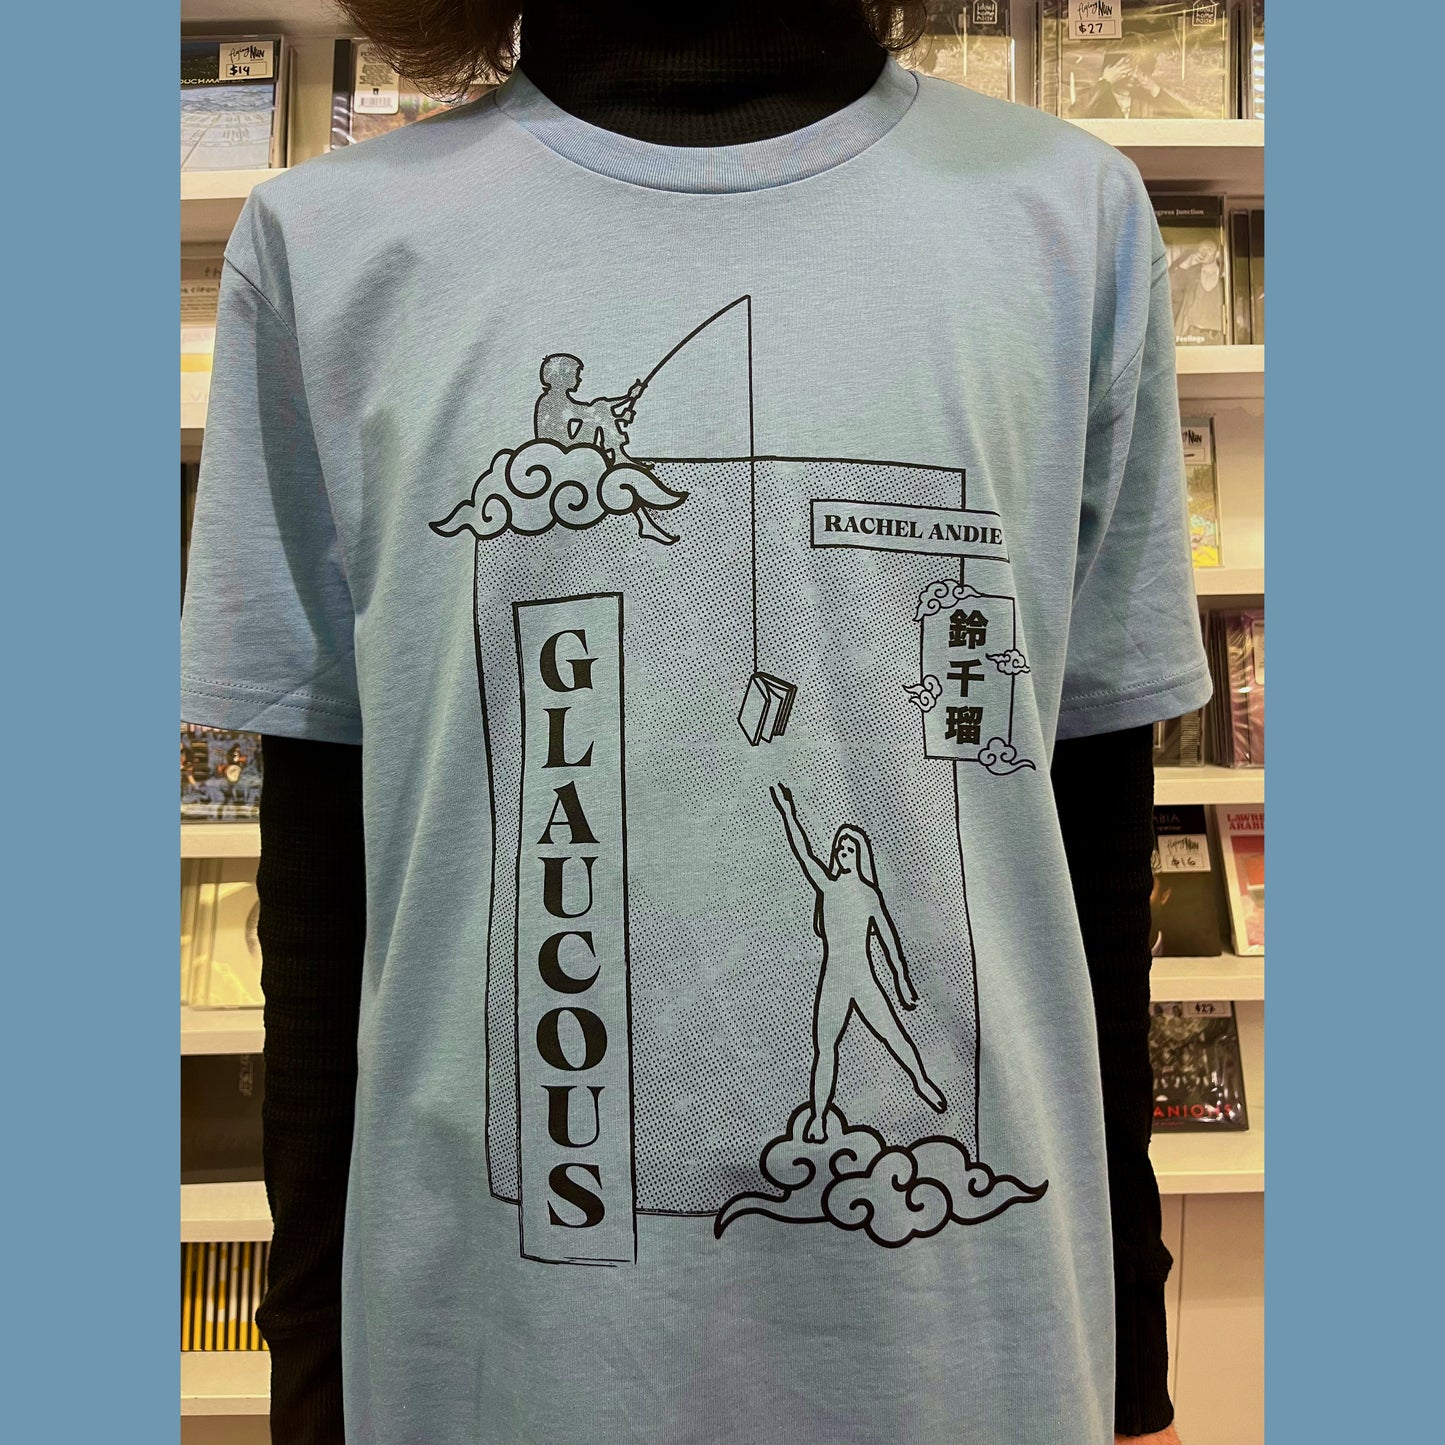 Rachel Andie - Glaucous Short Sleeve Tee | Buy the shirt now from Flying Nun Records